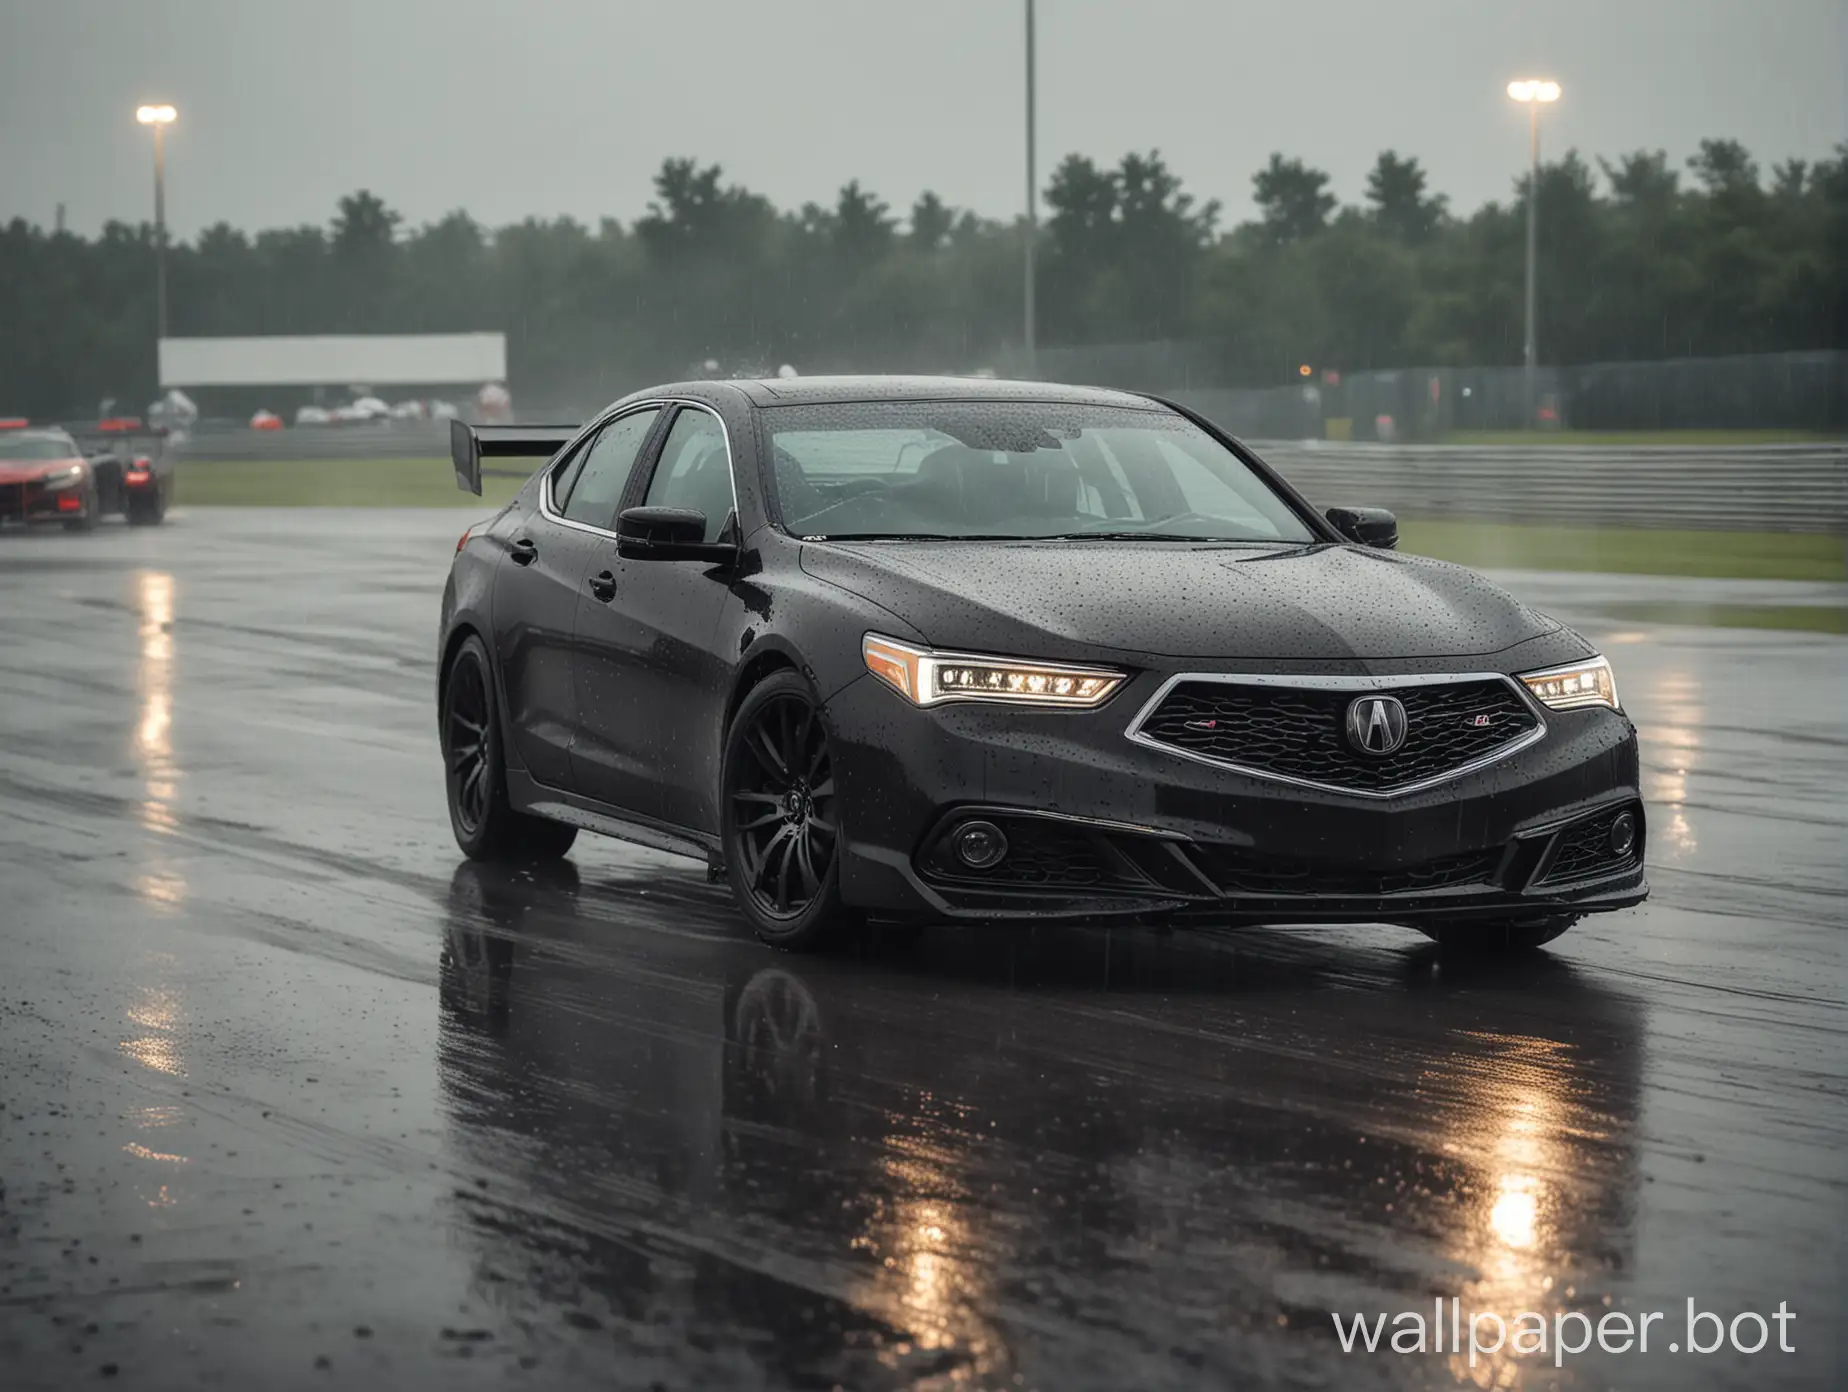 Acura-TLX-Racing-on-Rainy-Day-Track-in-4K-Resolution